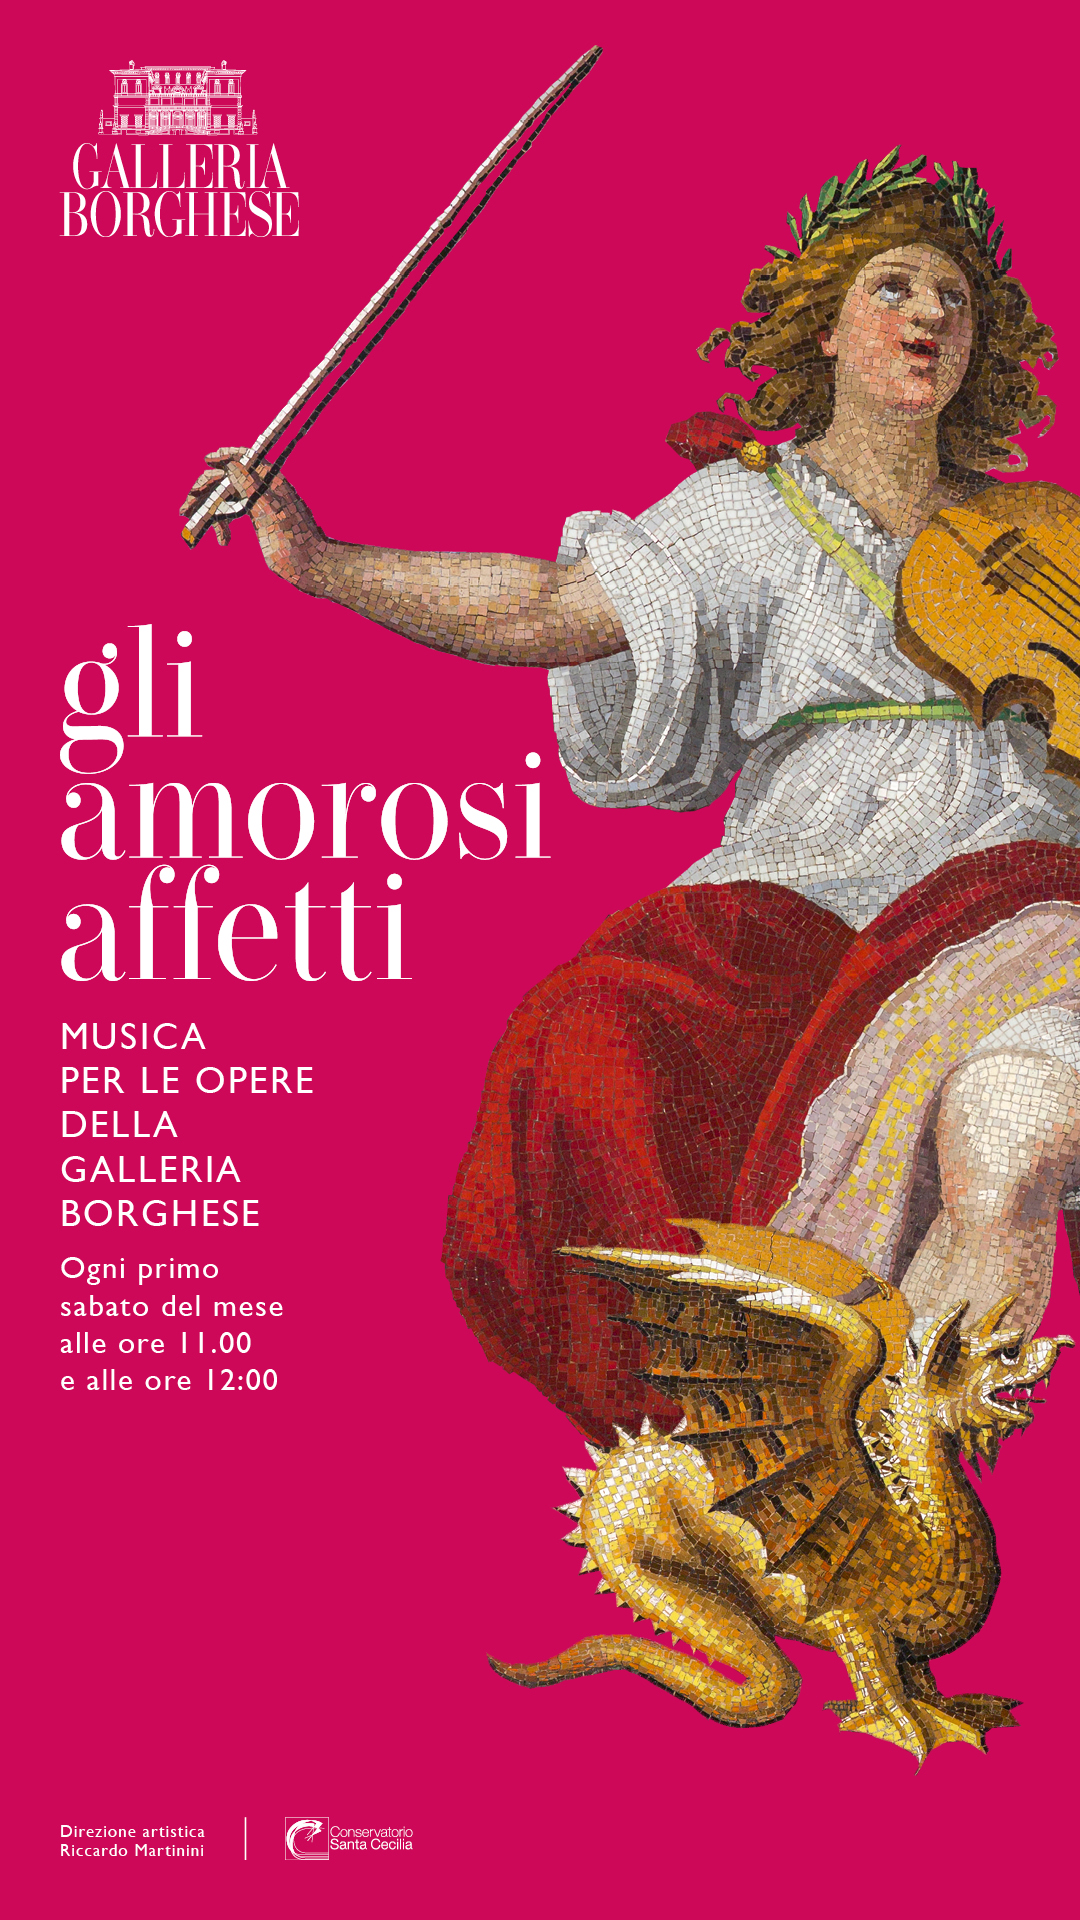 THE AMOROUS AFFECTIONS IS A MUSICAL INITIATIVE THAT WILL ANIMATE THE ROOMS OF THE GALLERIA BORGHESE